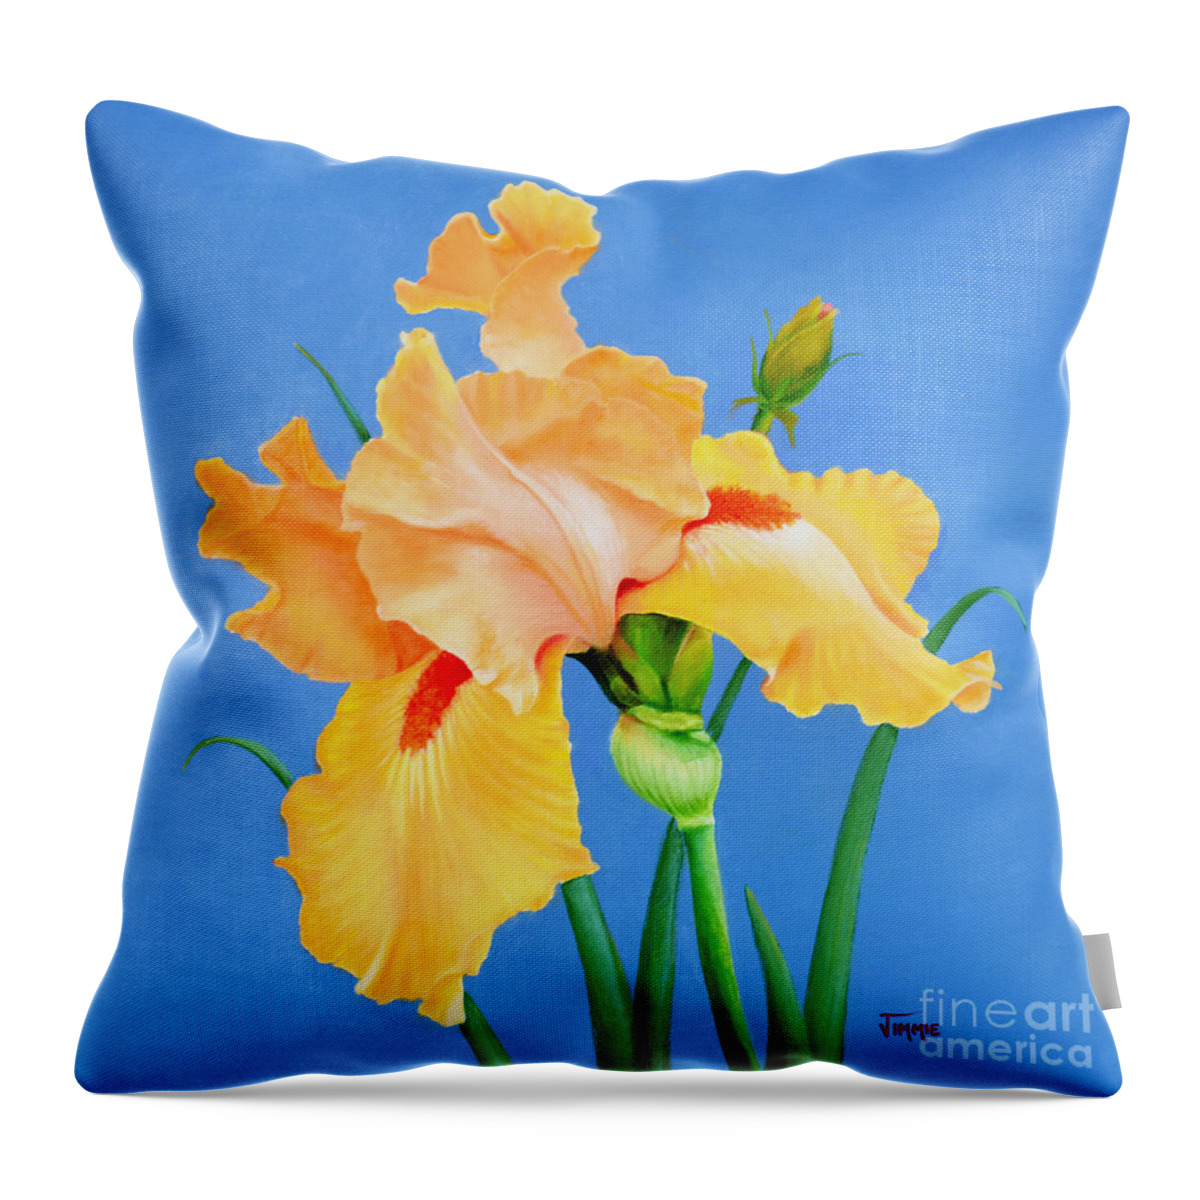 Yellow Iris Throw Pillow featuring the painting Yellow Iris by Jimmie Bartlett